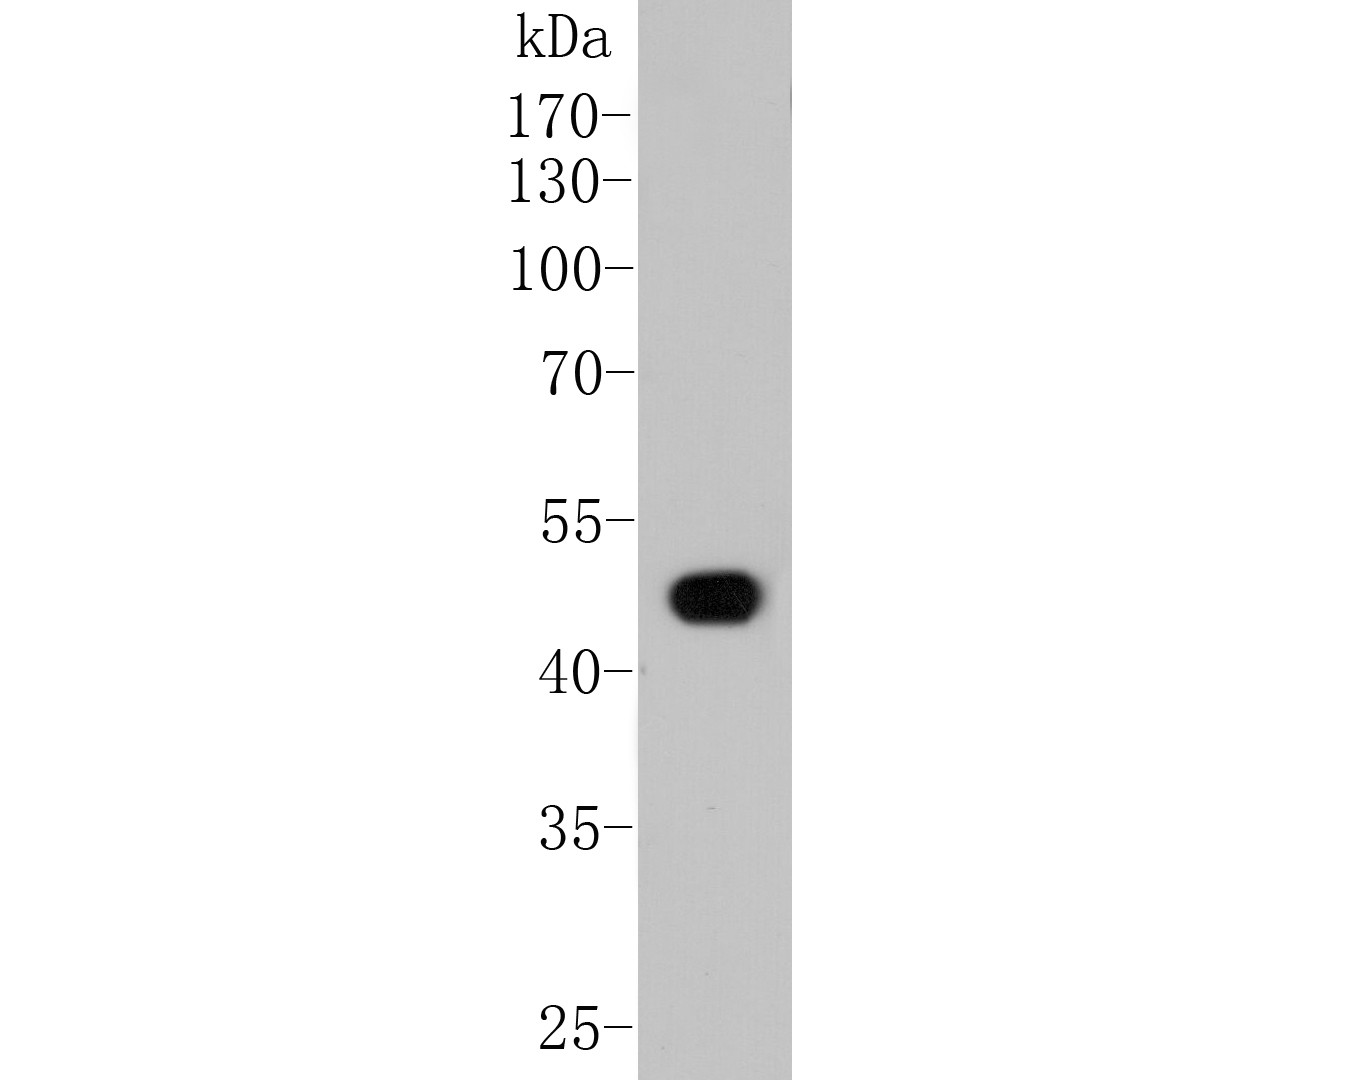 Western blot analysis of Fibrinogen on HepG2 cell lysate. Proteins were transferred to a PVDF membrane and blocked with 5% BSA in PBS for 1 hour at room temperature. The primary antibody (M1510-11, 1/100) was used in 5% BSA at room temperature for 2 hours. Goat Anti-Mouse IgG - HRP Secondary Antibody (HA1006) at 1:5,000 dilution was used for 1 hour at room temperature.